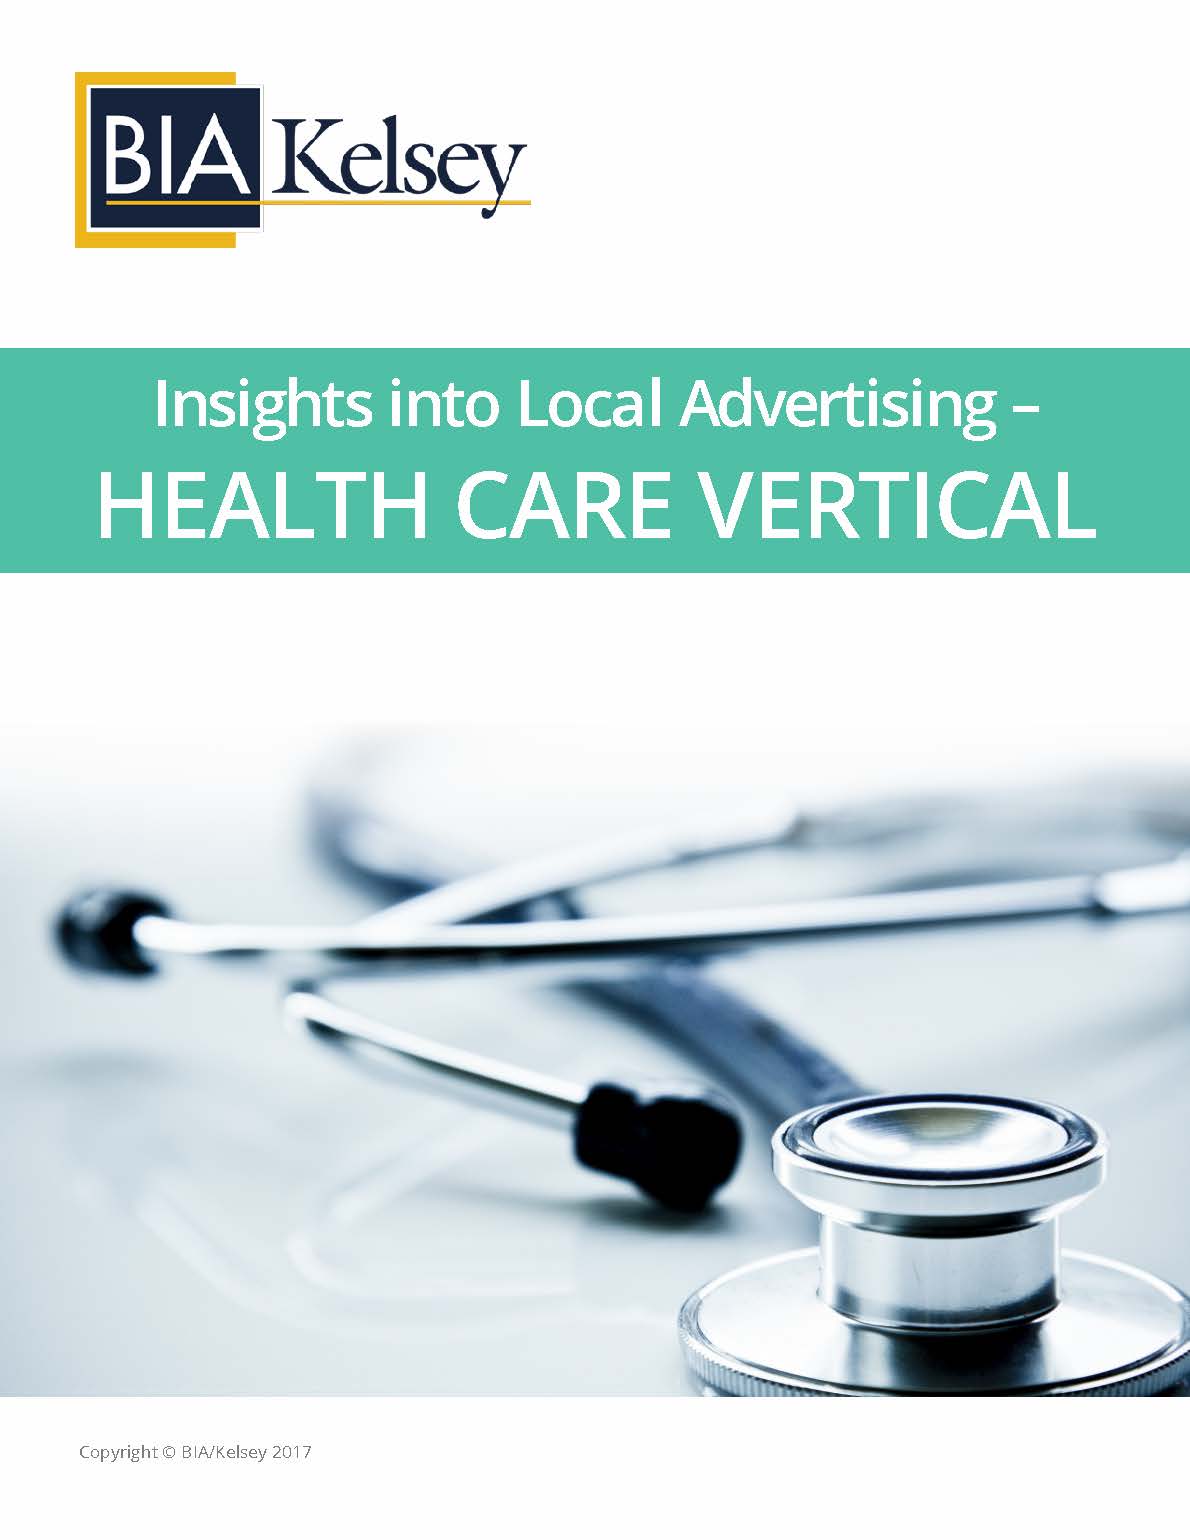 Healthcare Advertising Spend To Reach $10.85 Billion In 2017